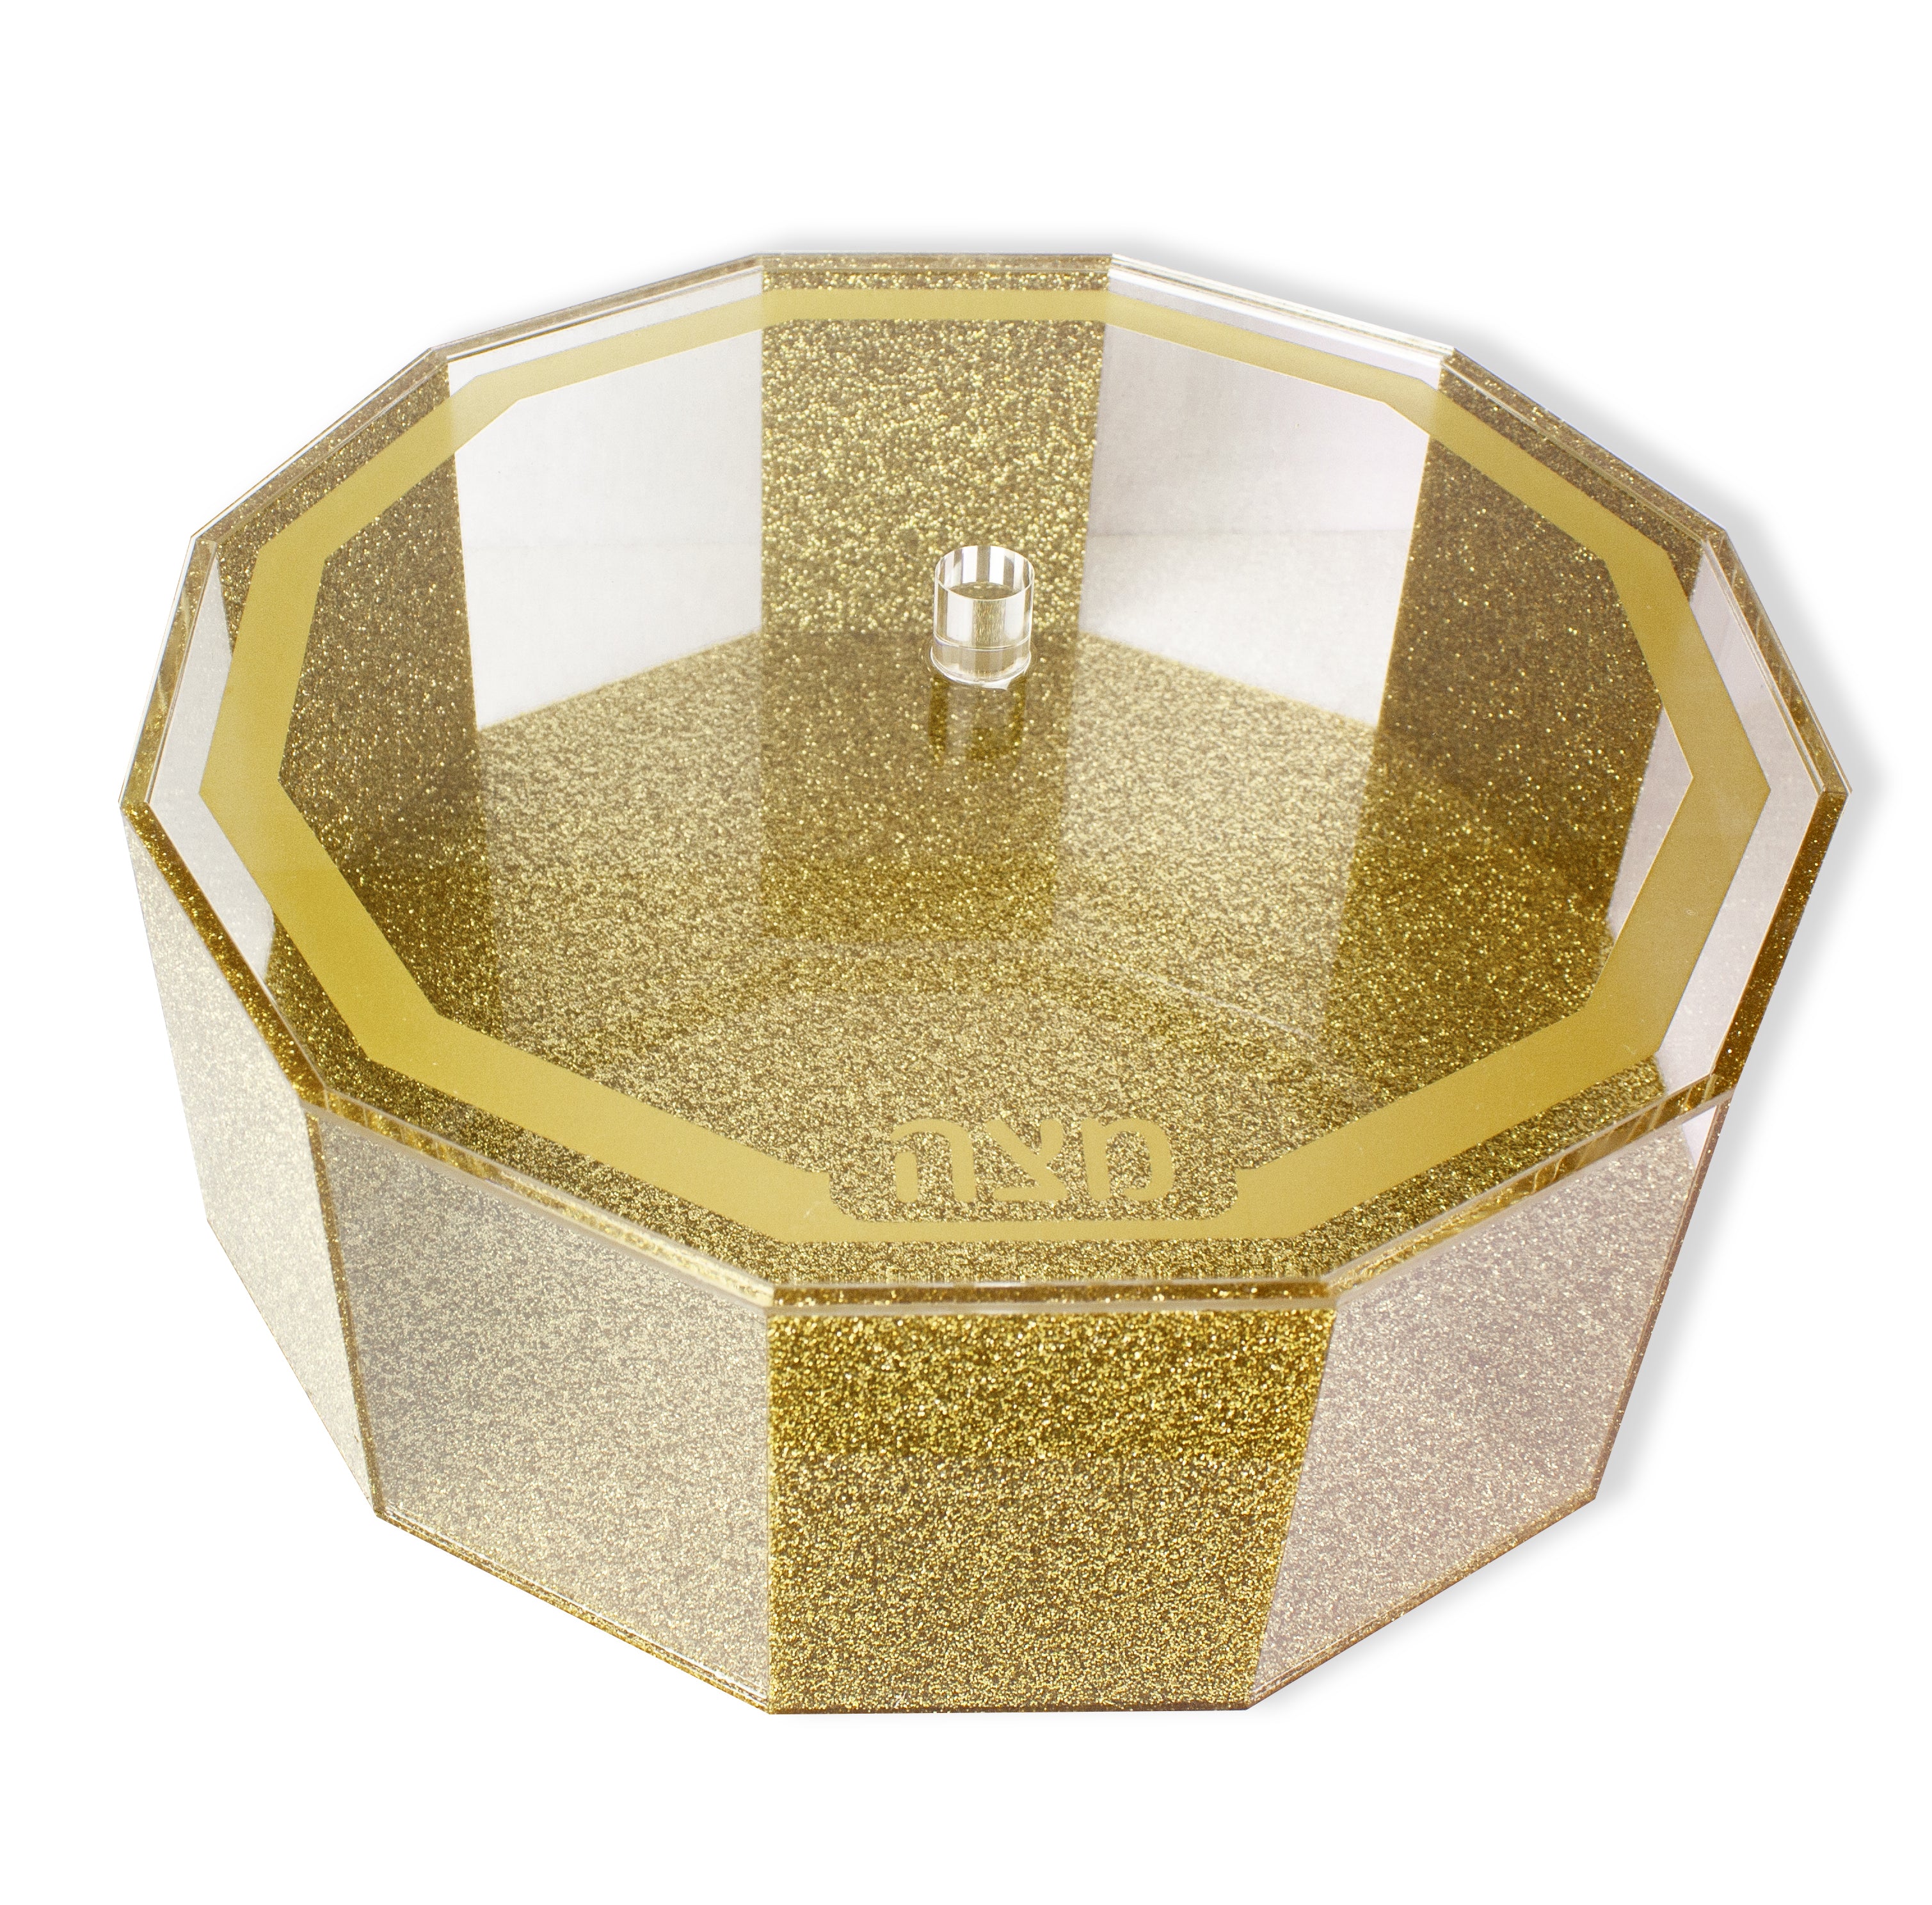 Gold and Clear Lucite Hexagonal Passover Matzah Box with Lid